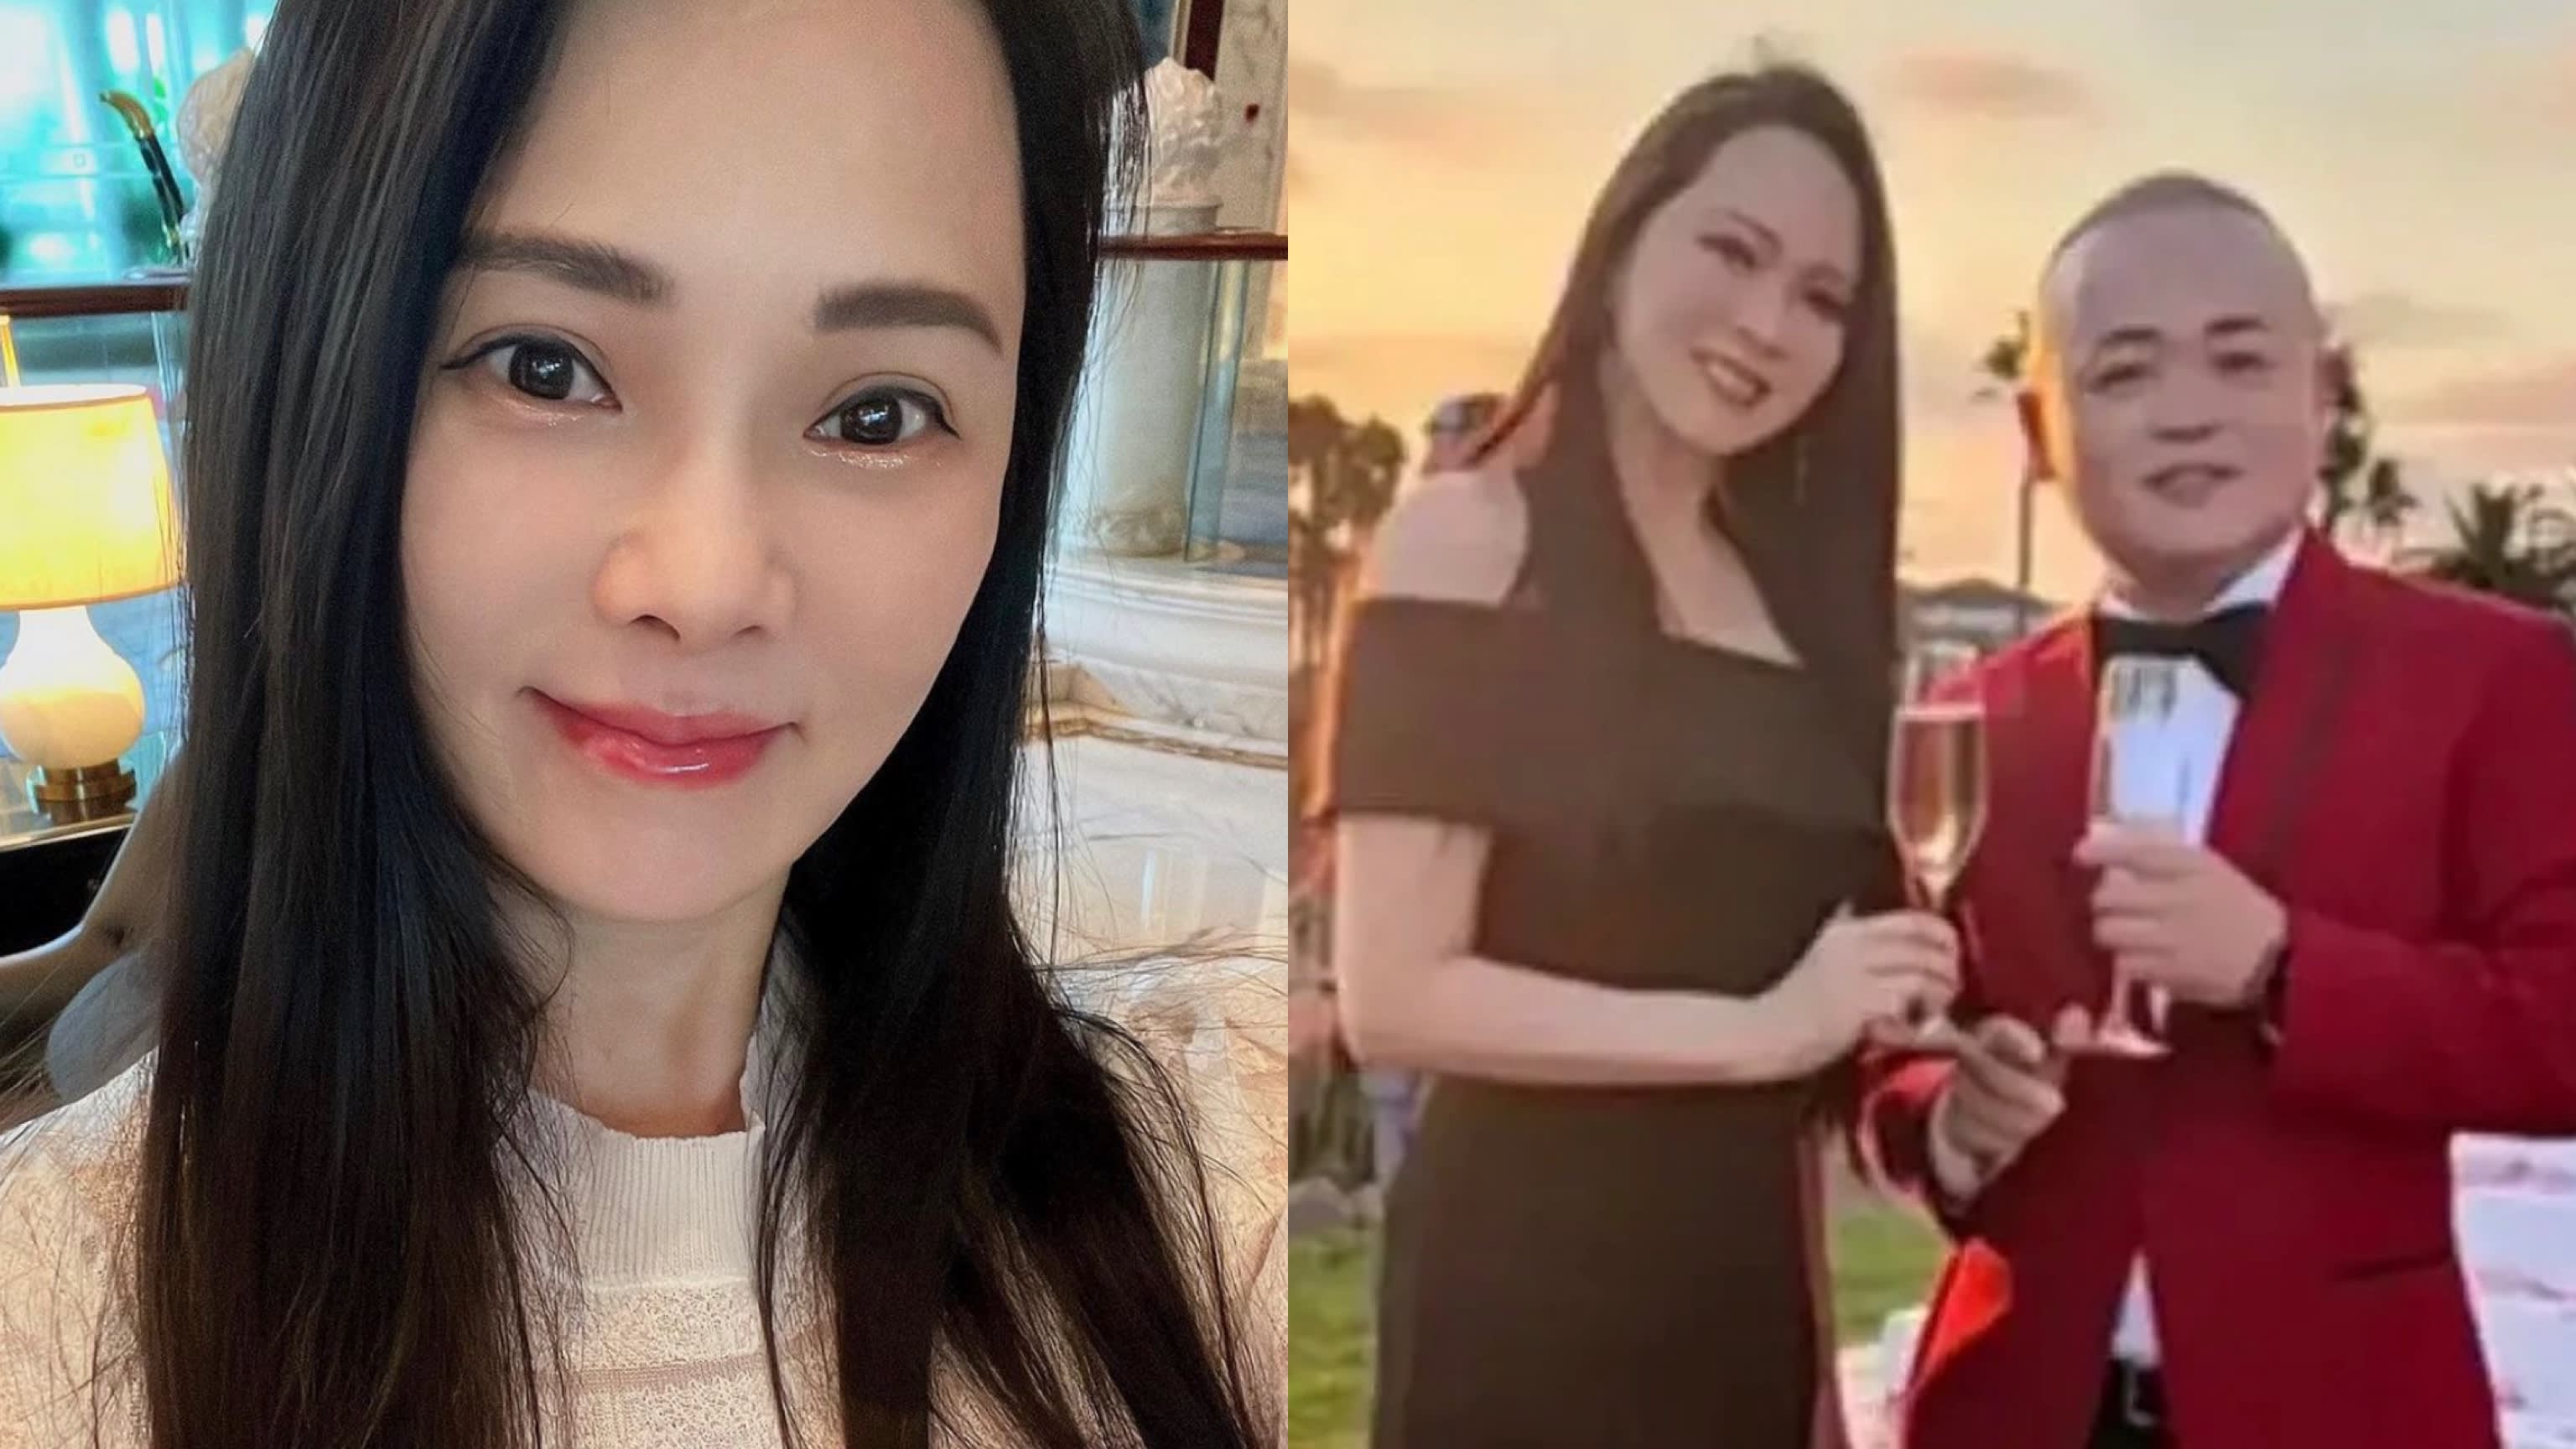 Annie Yi Says She Is Not Friends With Billionaire Who Looks Like A Fugitive; Was Just Attending A Charity Event